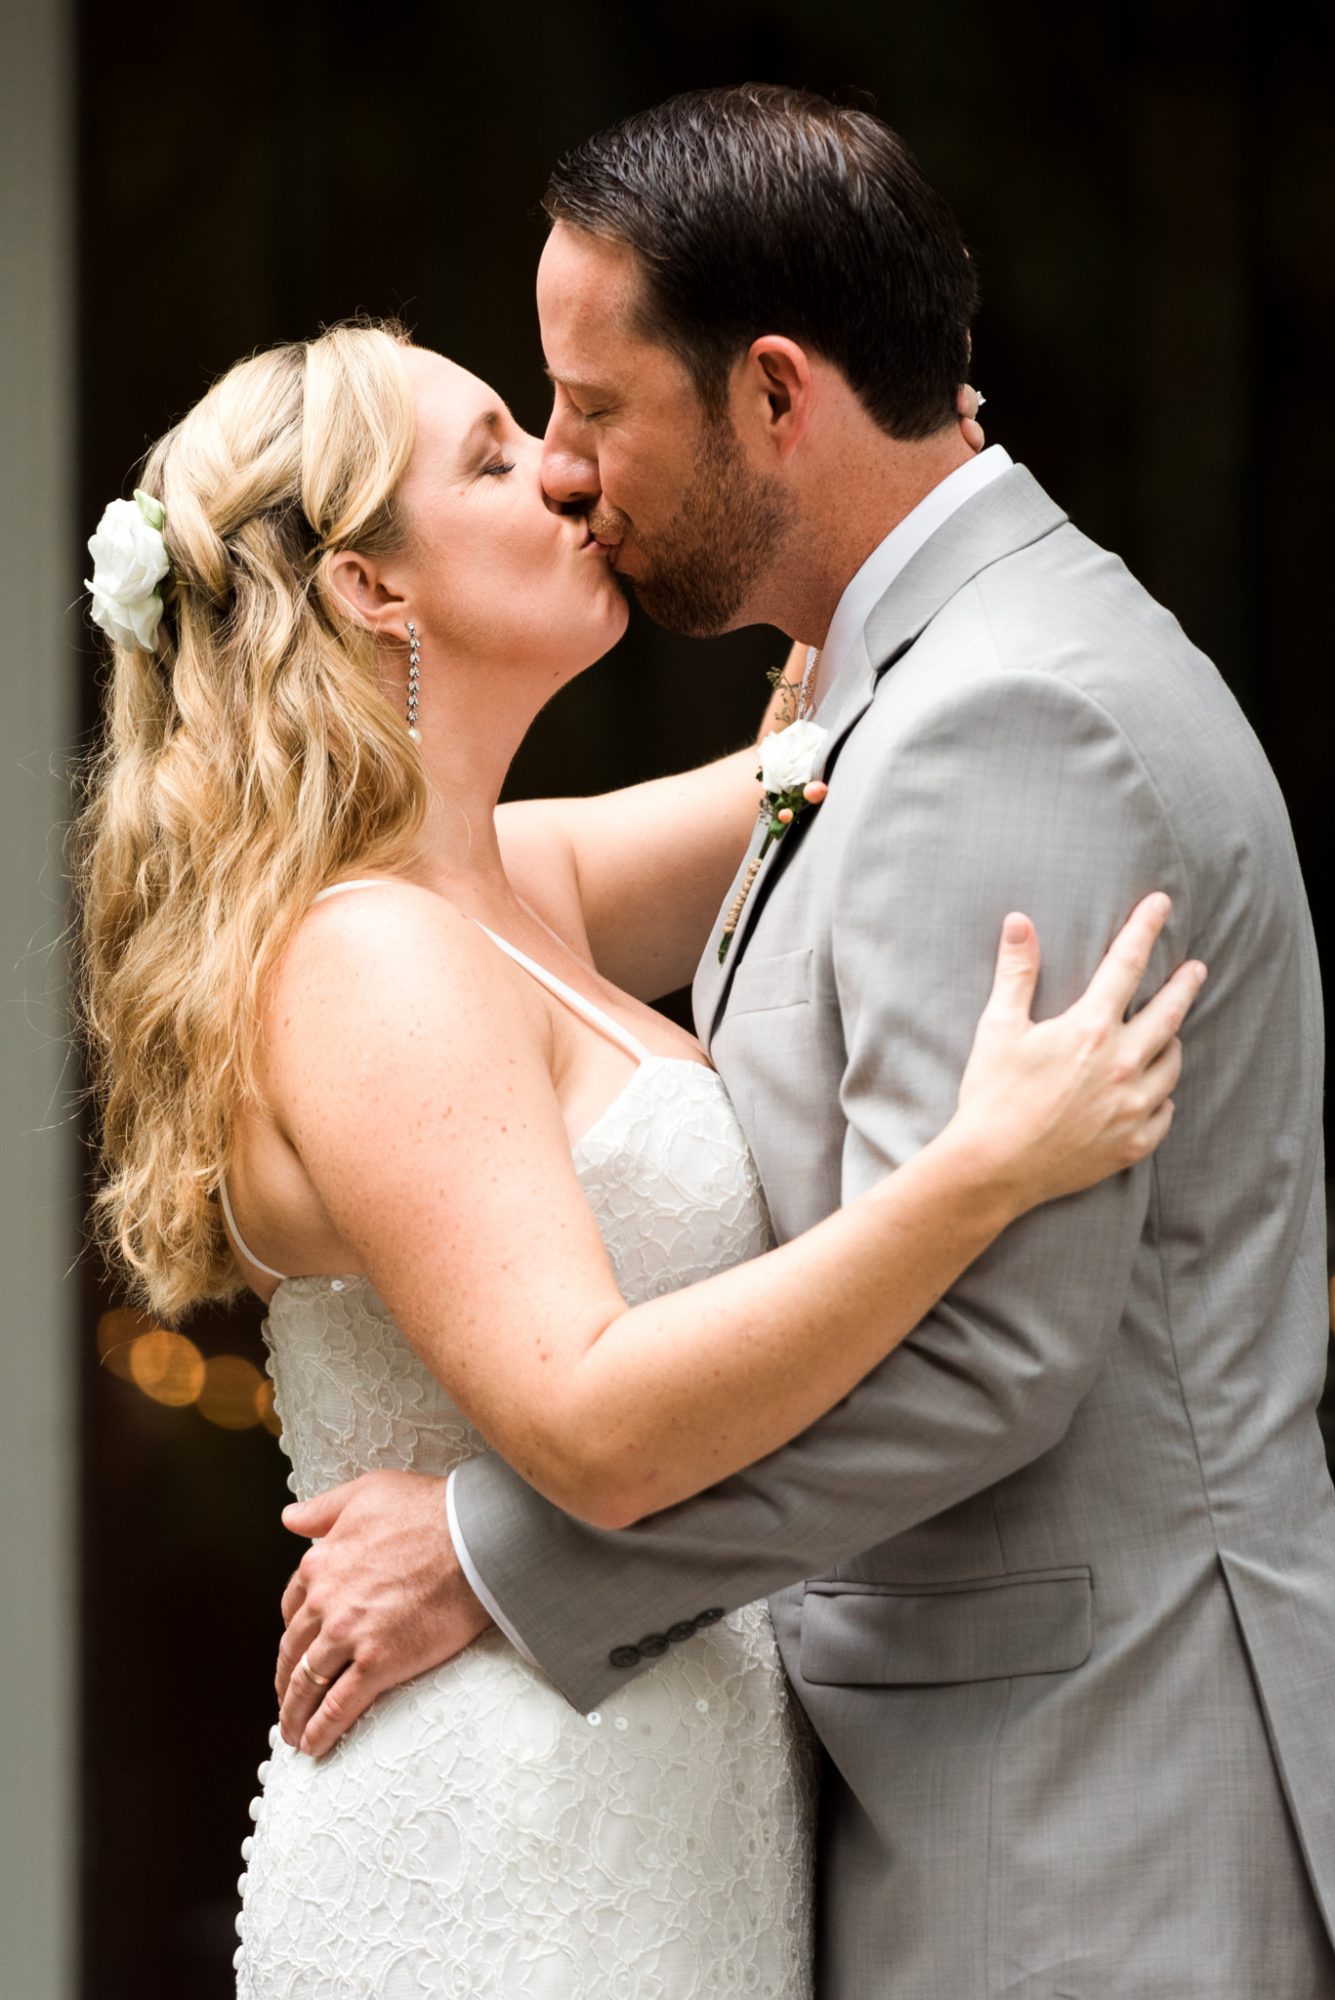 A Key West bride and groom sharing a romantic kiss in front of the beautiful Audubon House and Gardens during their wedding ceremony.